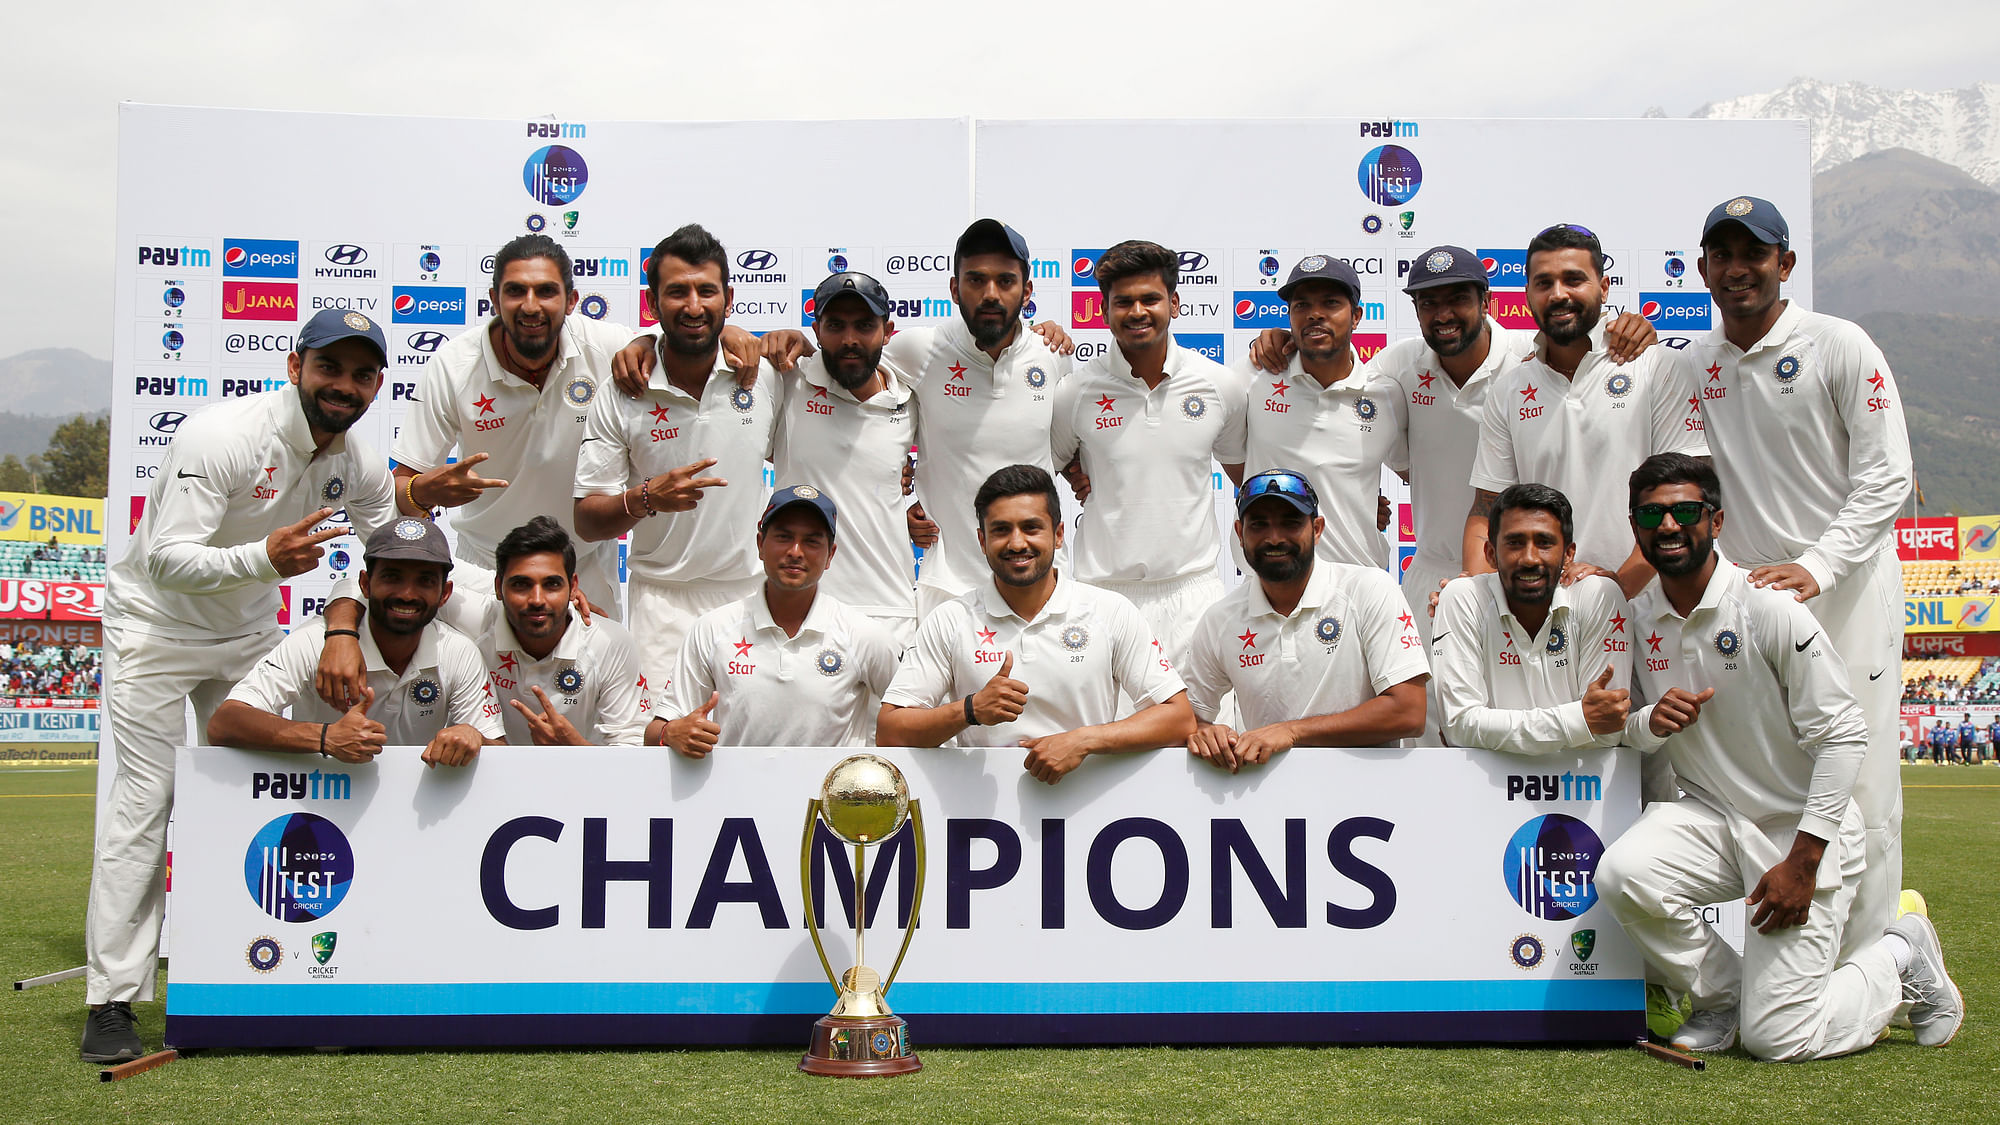 The Indian team with the series trophy. (Photo: BCCI)